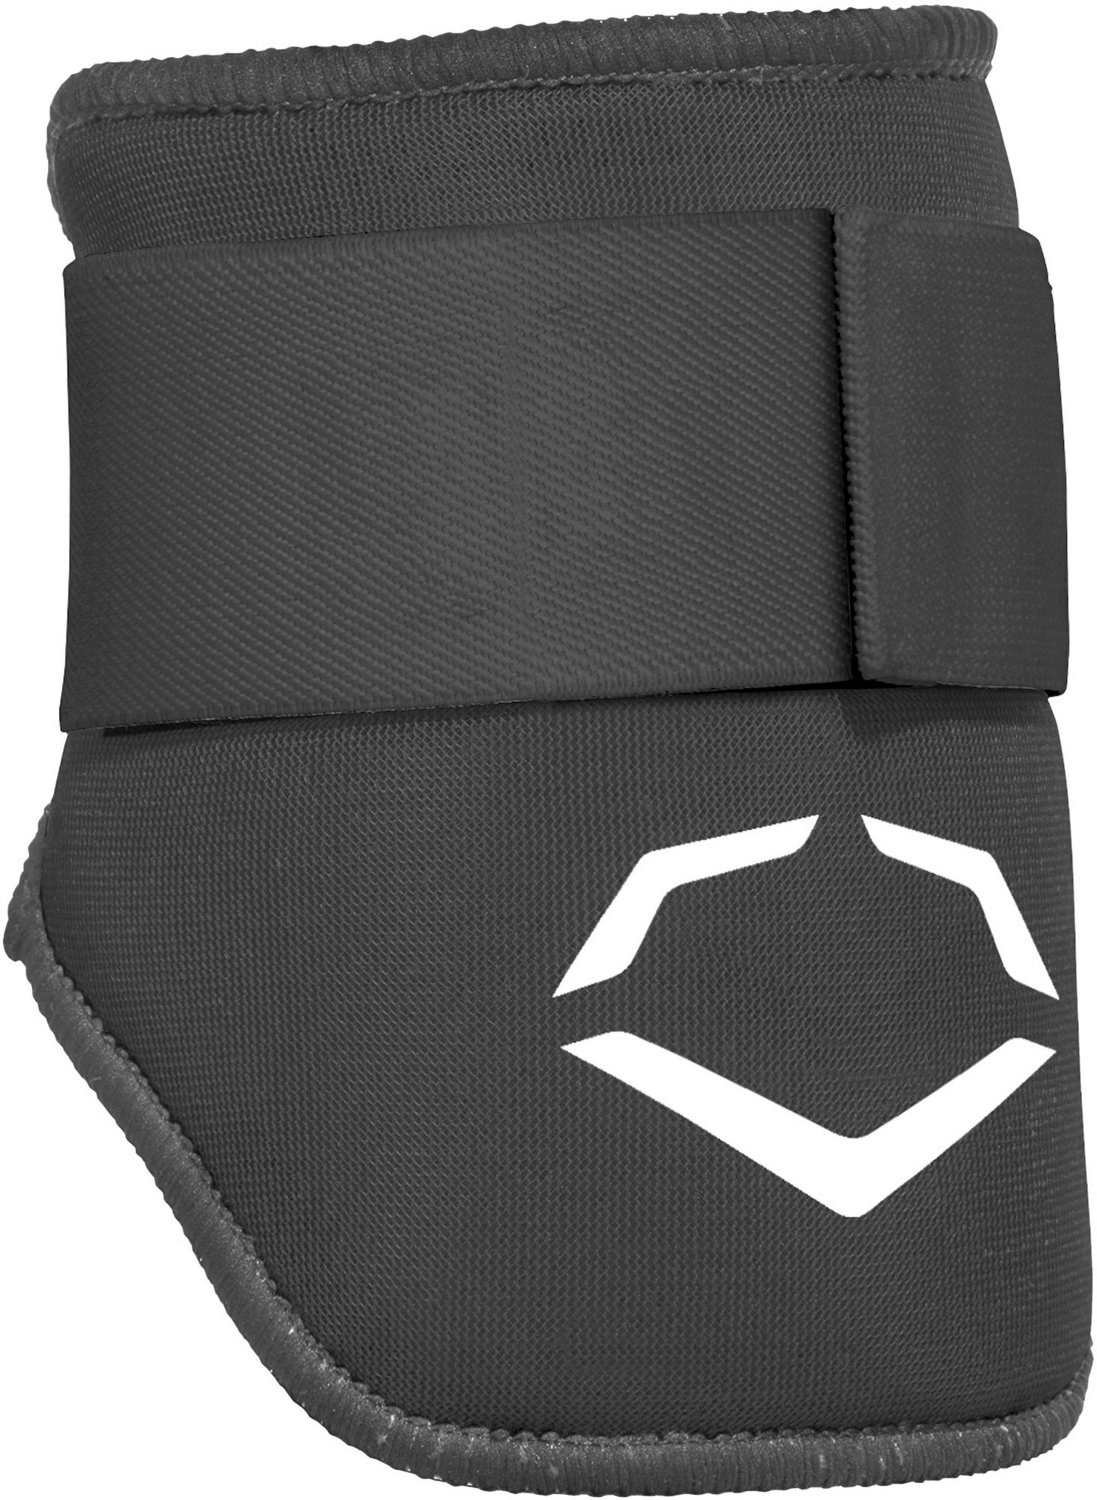 EvoShield Boys' SRZ-1 Batter's Elbow Guard                                                                                       - view number 1 selected